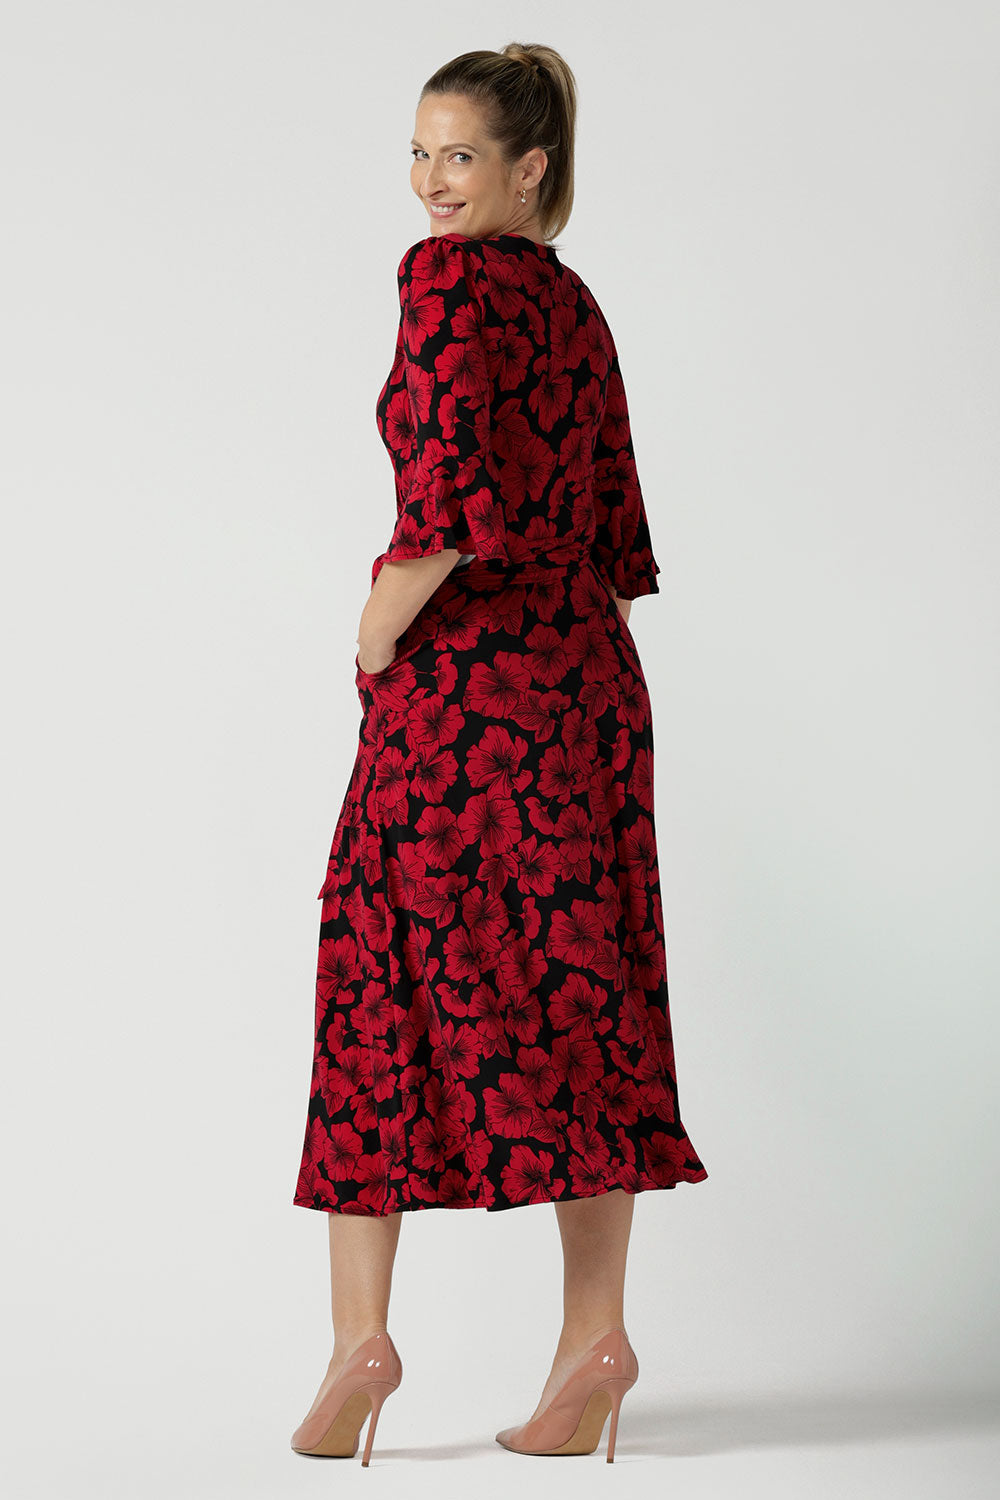 Back view of a size 10 woman wearing the size 10 Portia dress in Bold Poppy. Made in Australia for women size 8 - 24. A functioning wrap dress with waist ties and flutter sleeves.